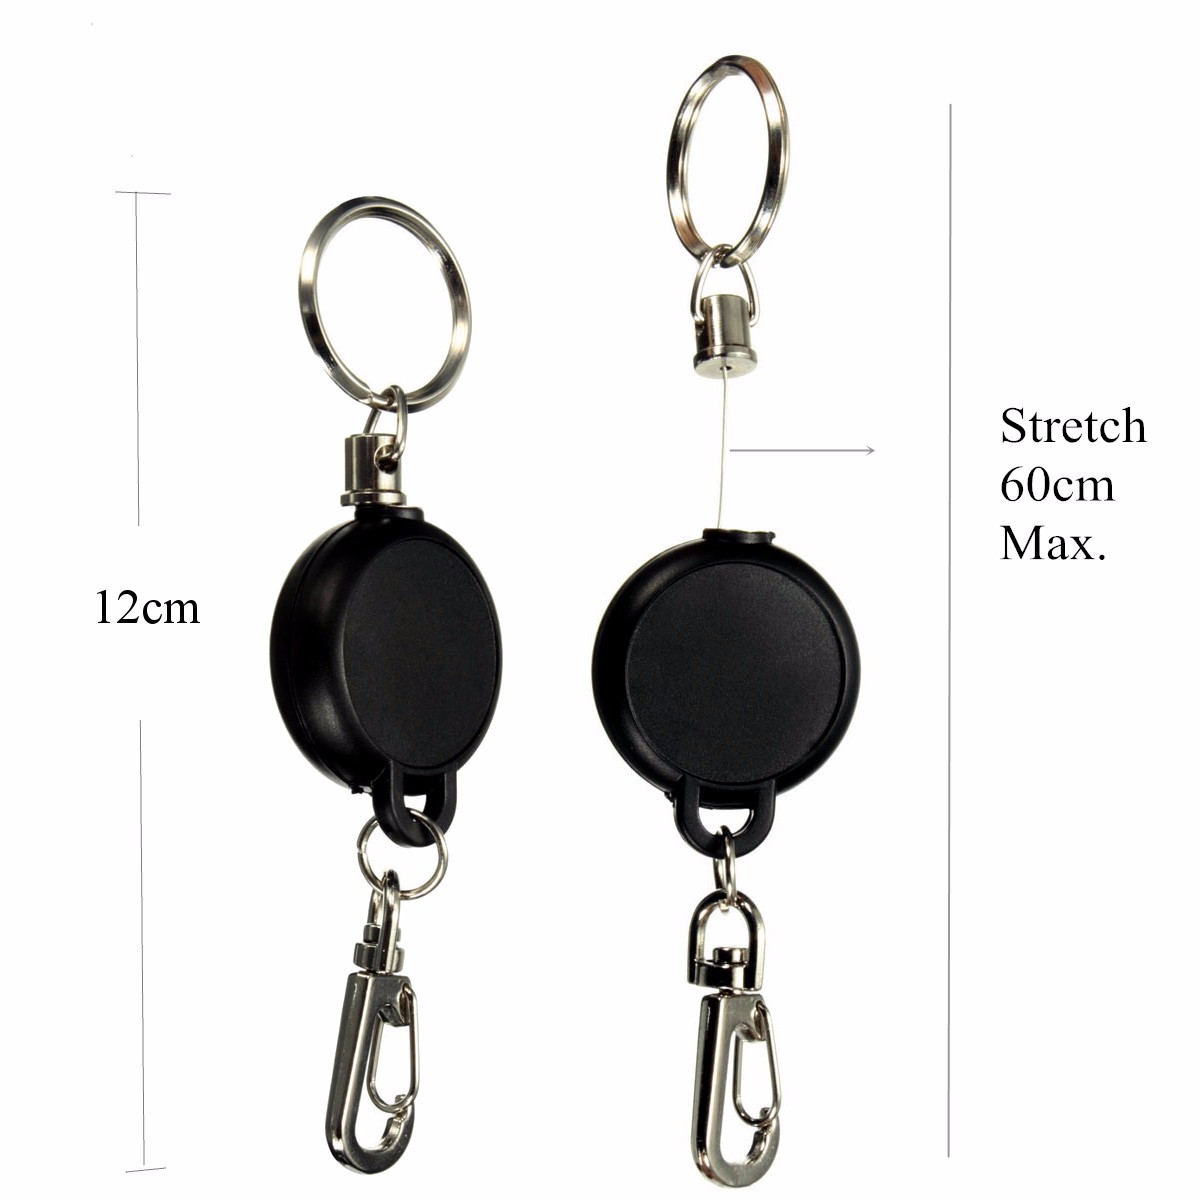 Key-Chain-Stainless-Steel-Cord-Holder-Keyring-Reel-Retractable-Recoil-Belt-Clip-Key-Clip-1291644